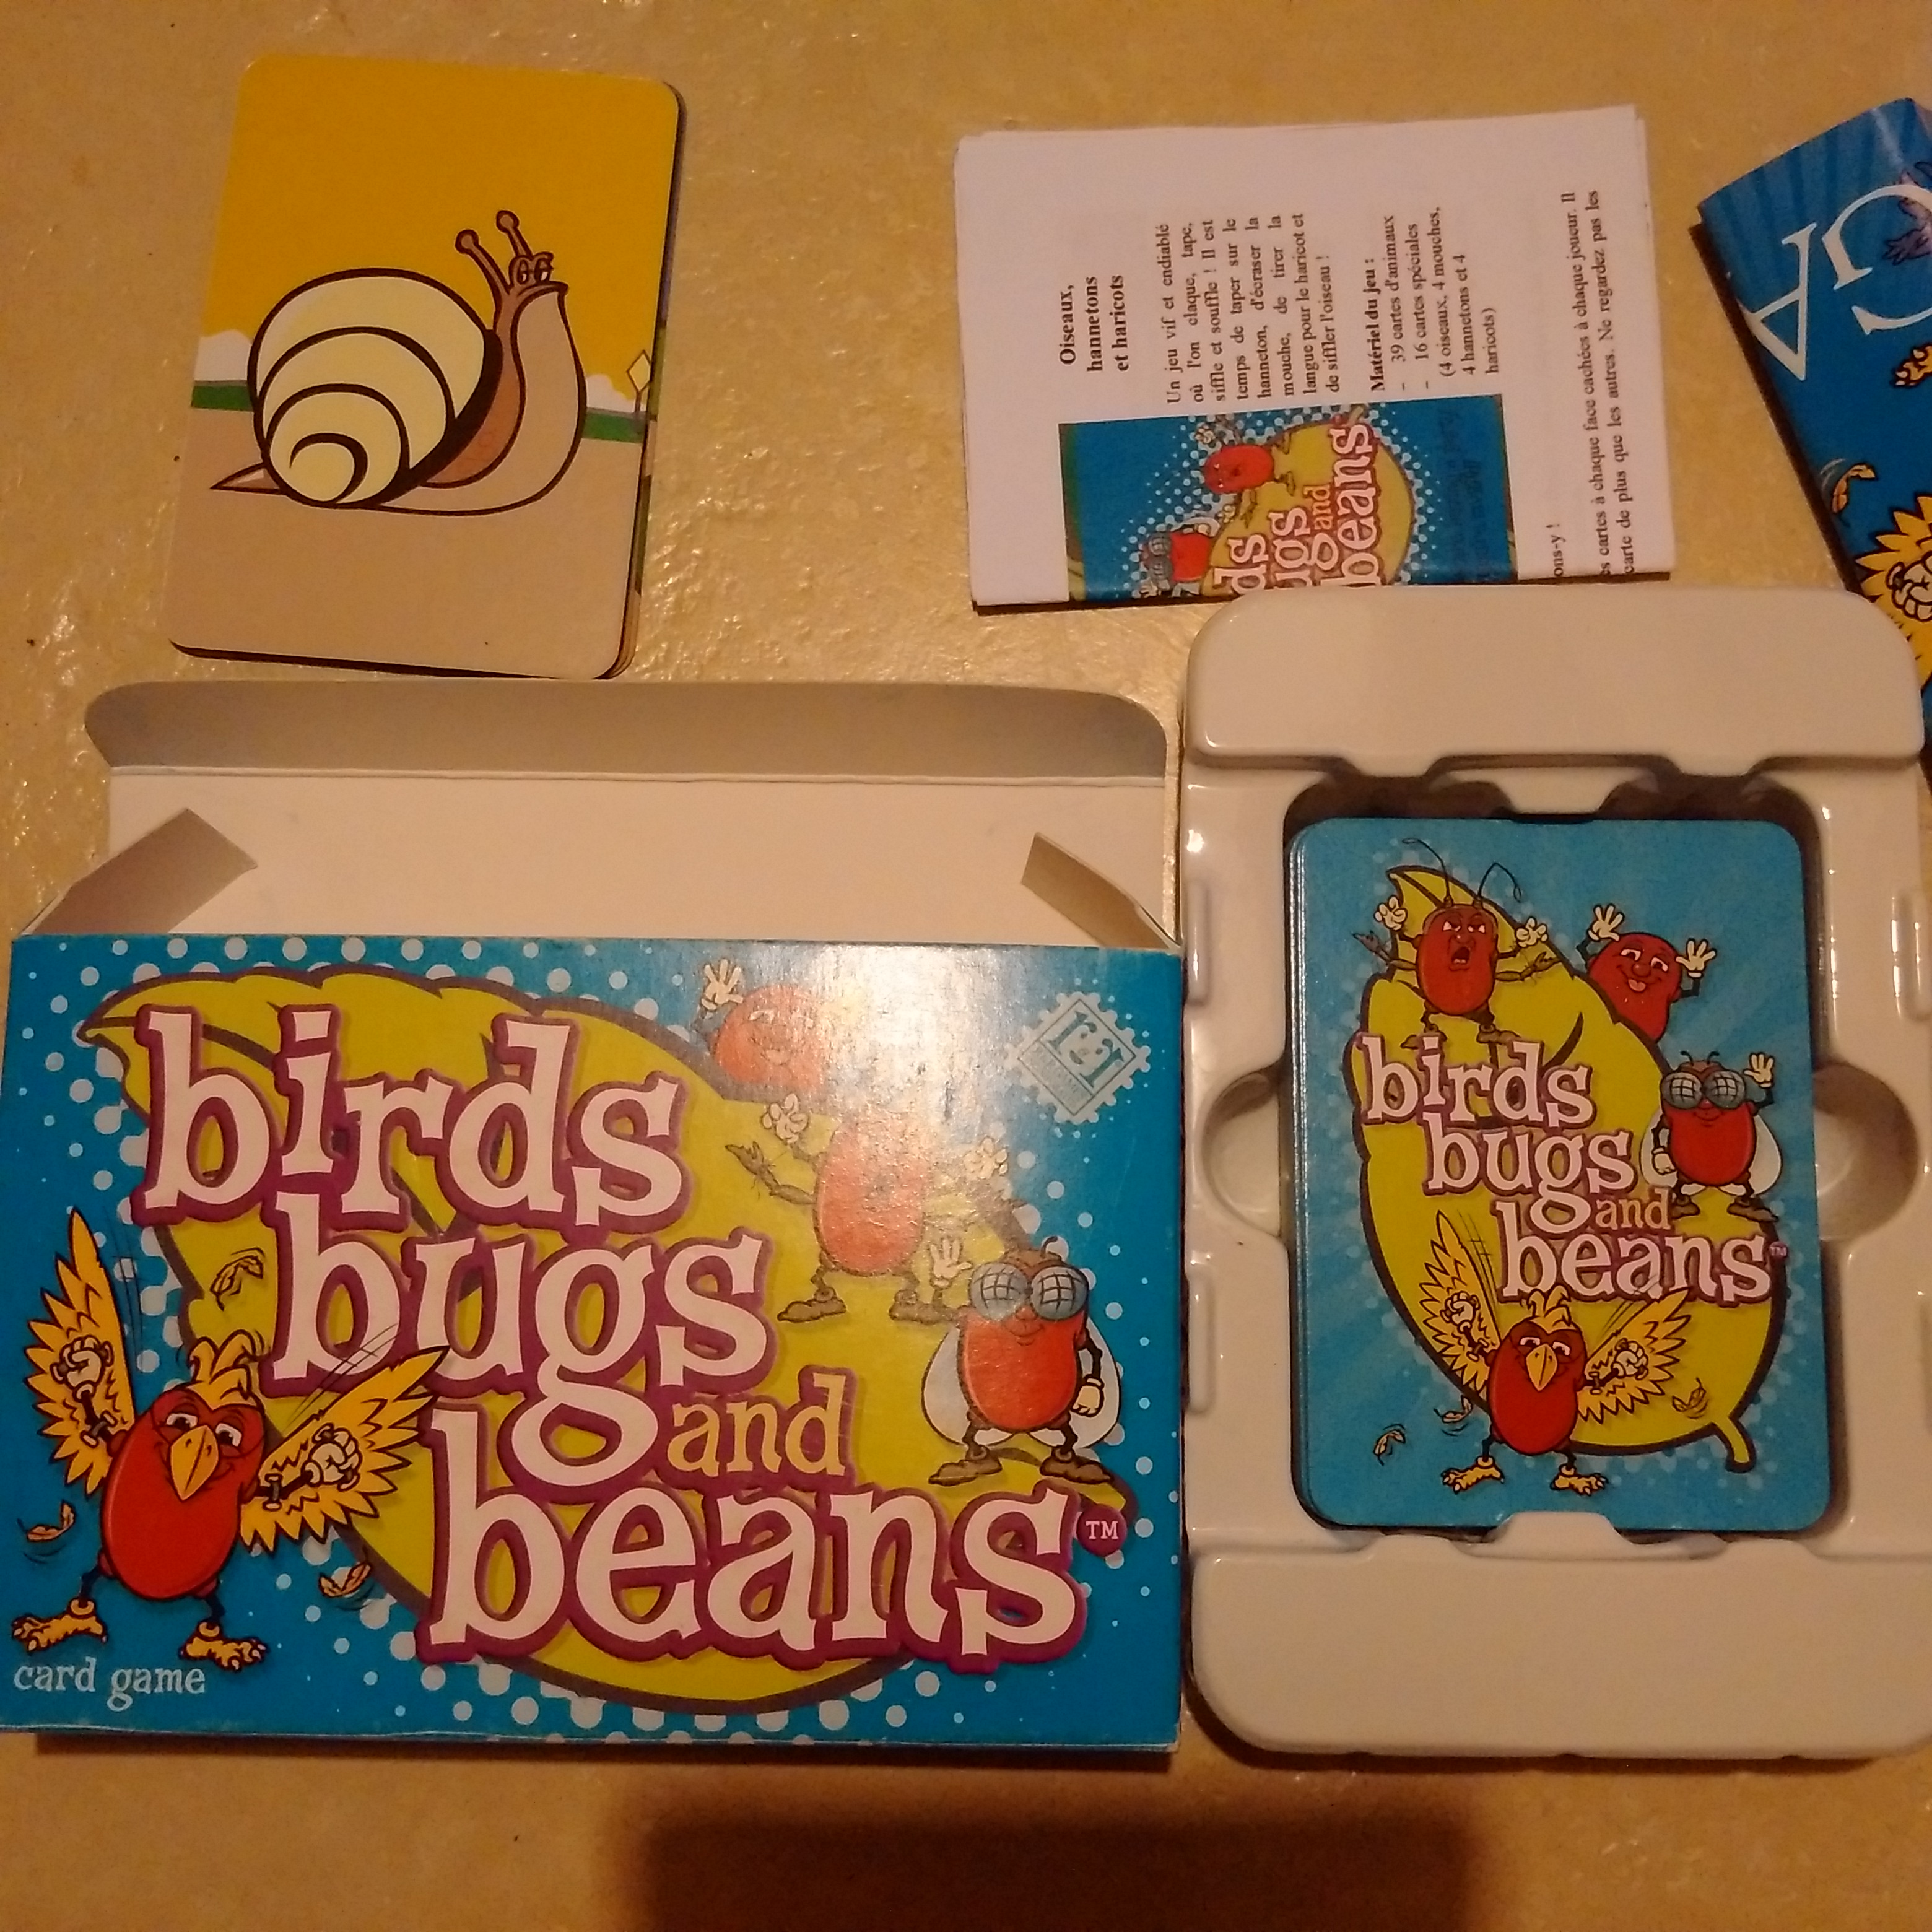 Birds, bugs and beans